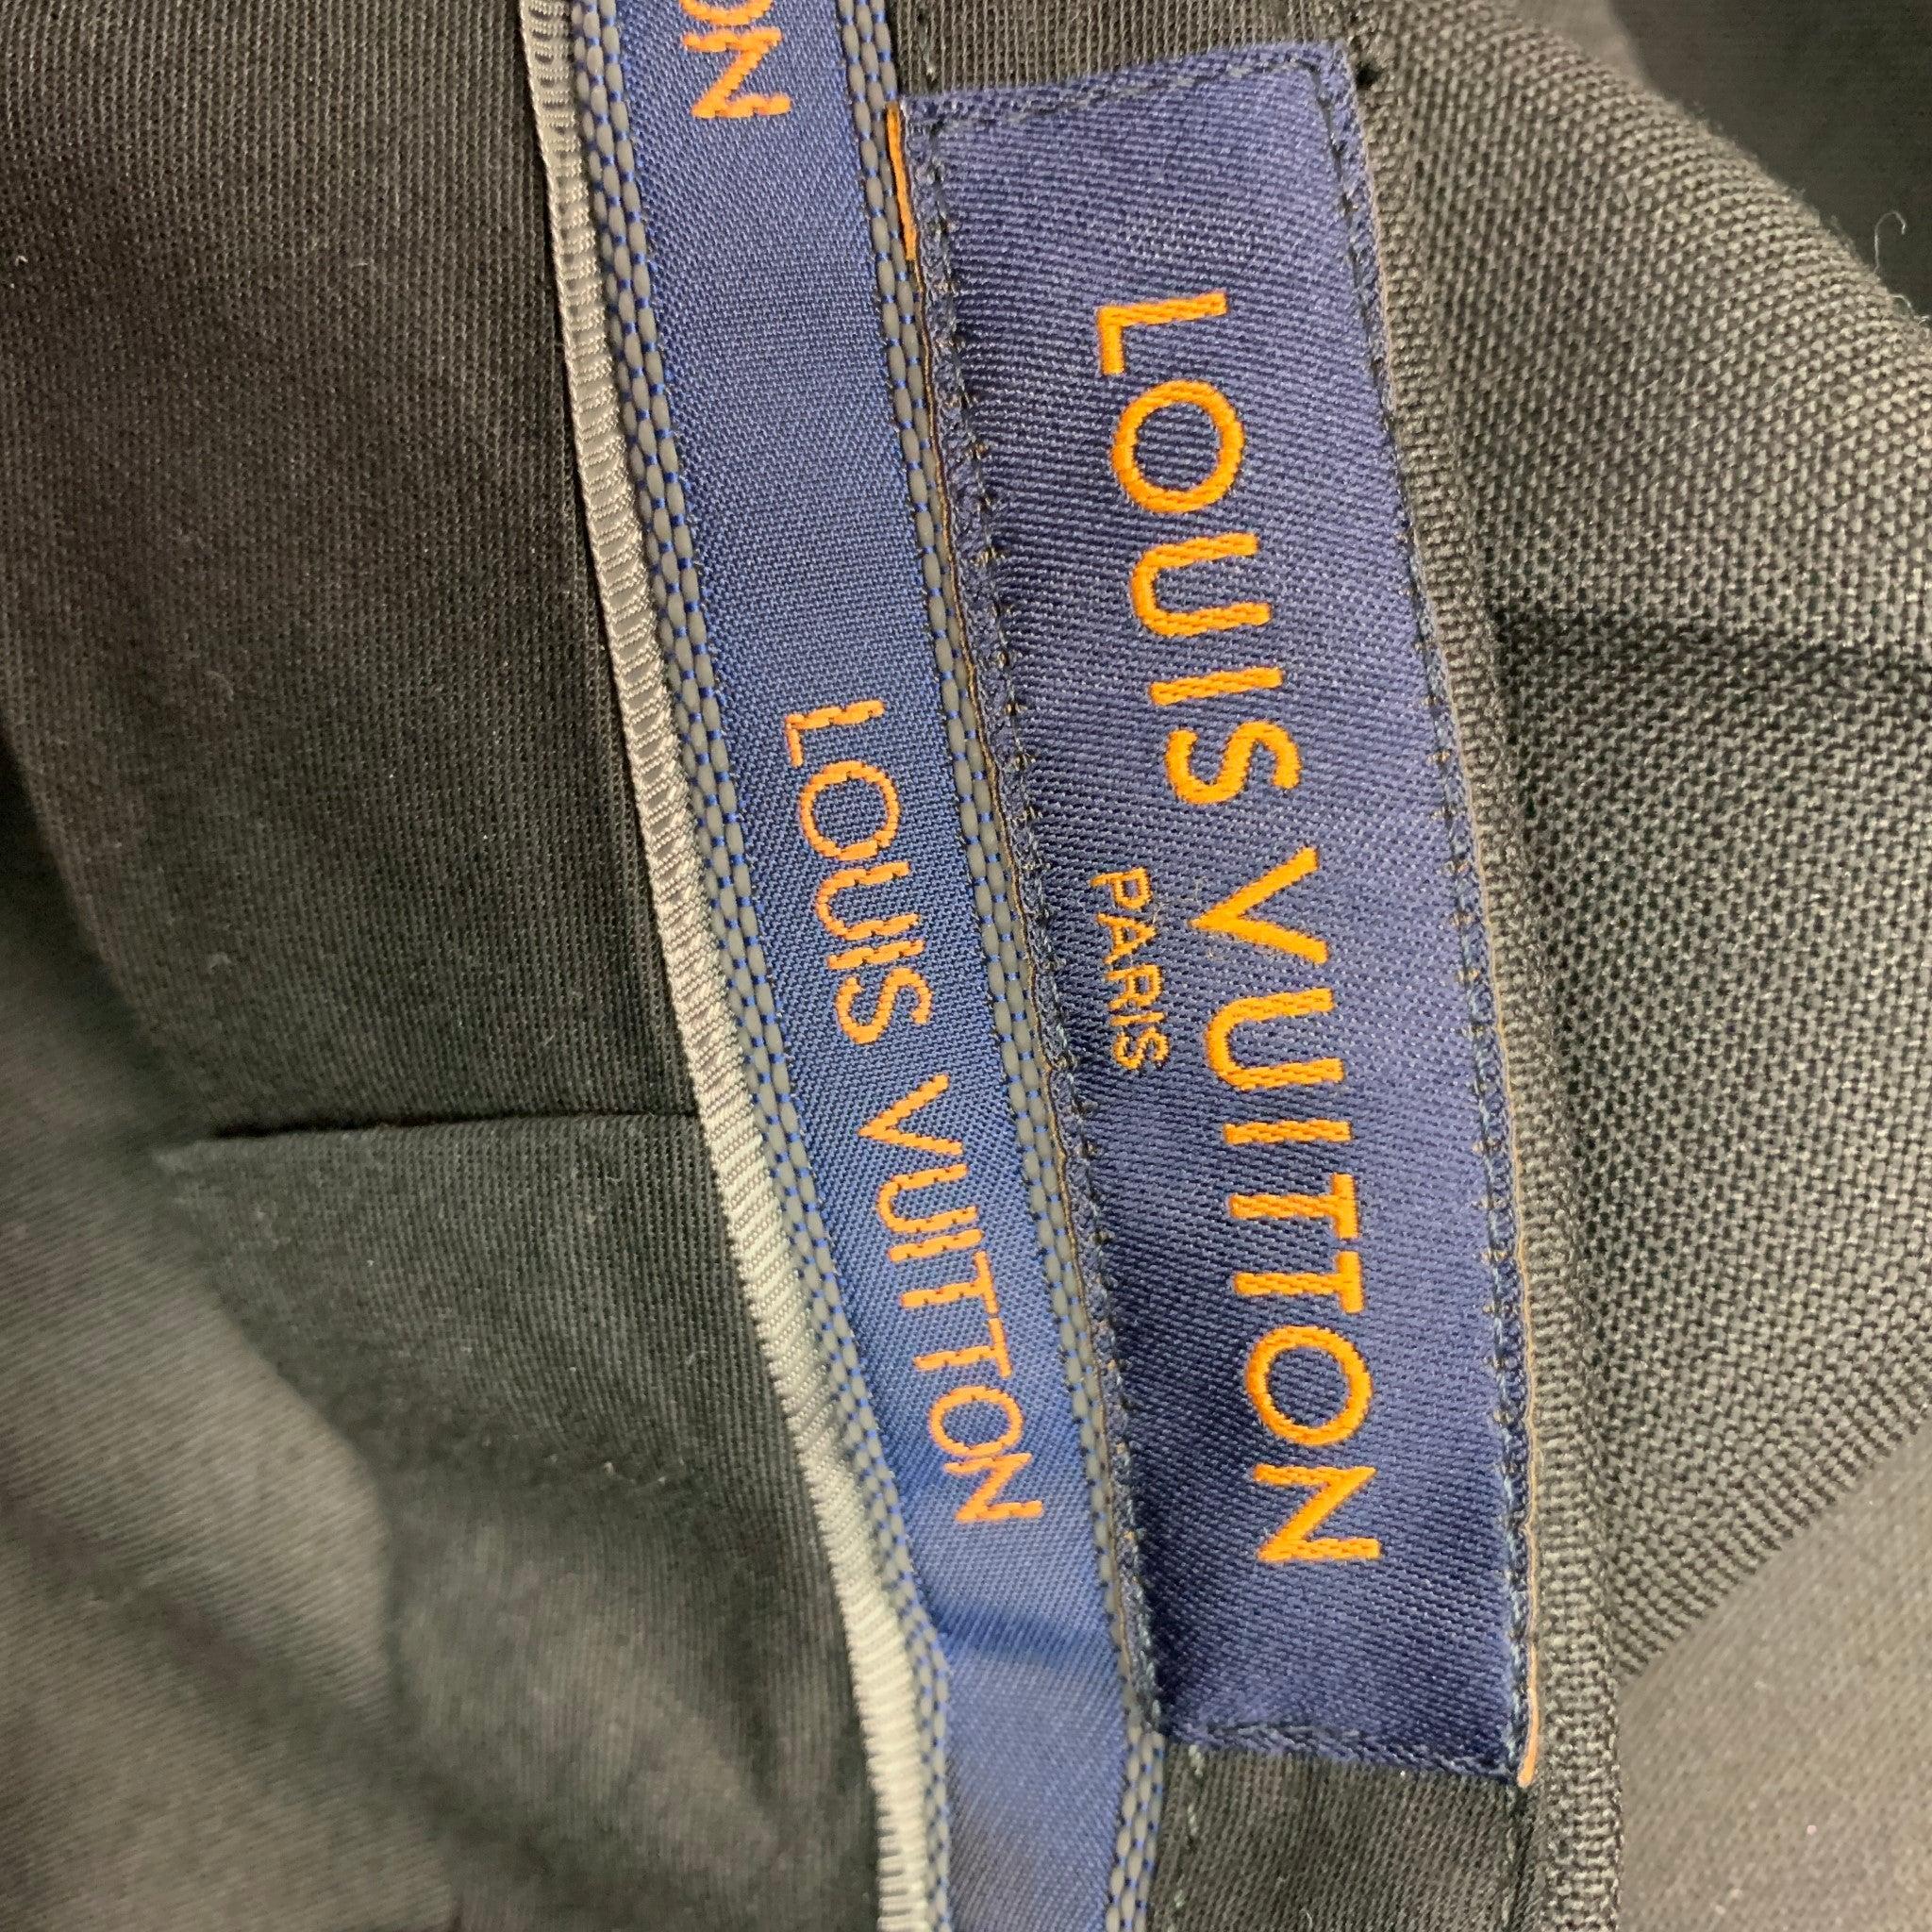 LOUIS VUITTON Size 36 Black Solid Wool Blend Zip Fly Dress Pants In Excellent Condition For Sale In San Francisco, CA